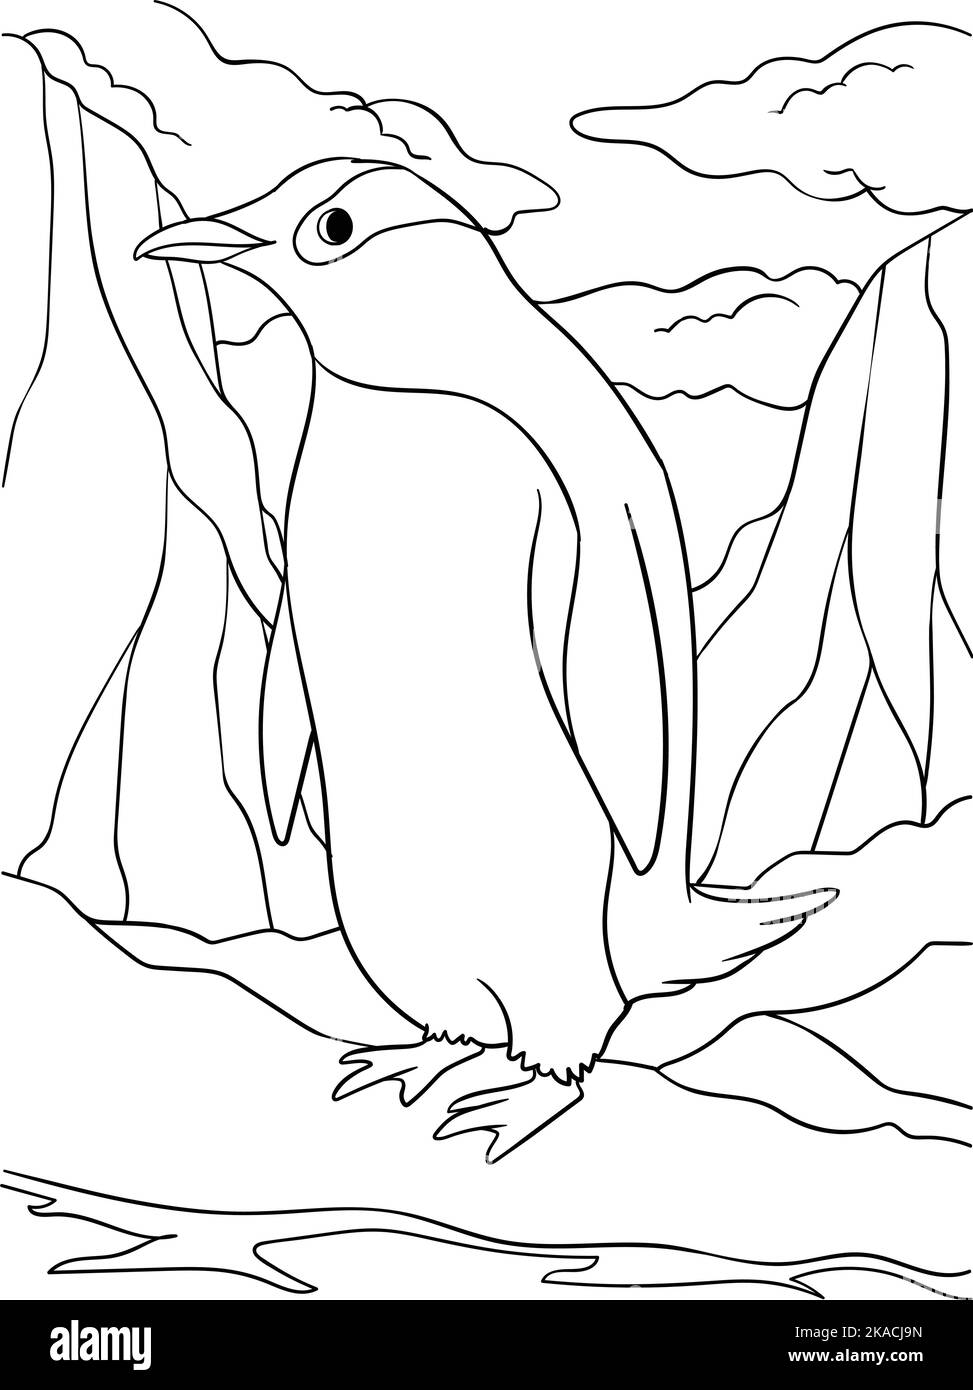 Penguin Animal Coloring Page for Kids Stock Vector Image & Art - Alamy